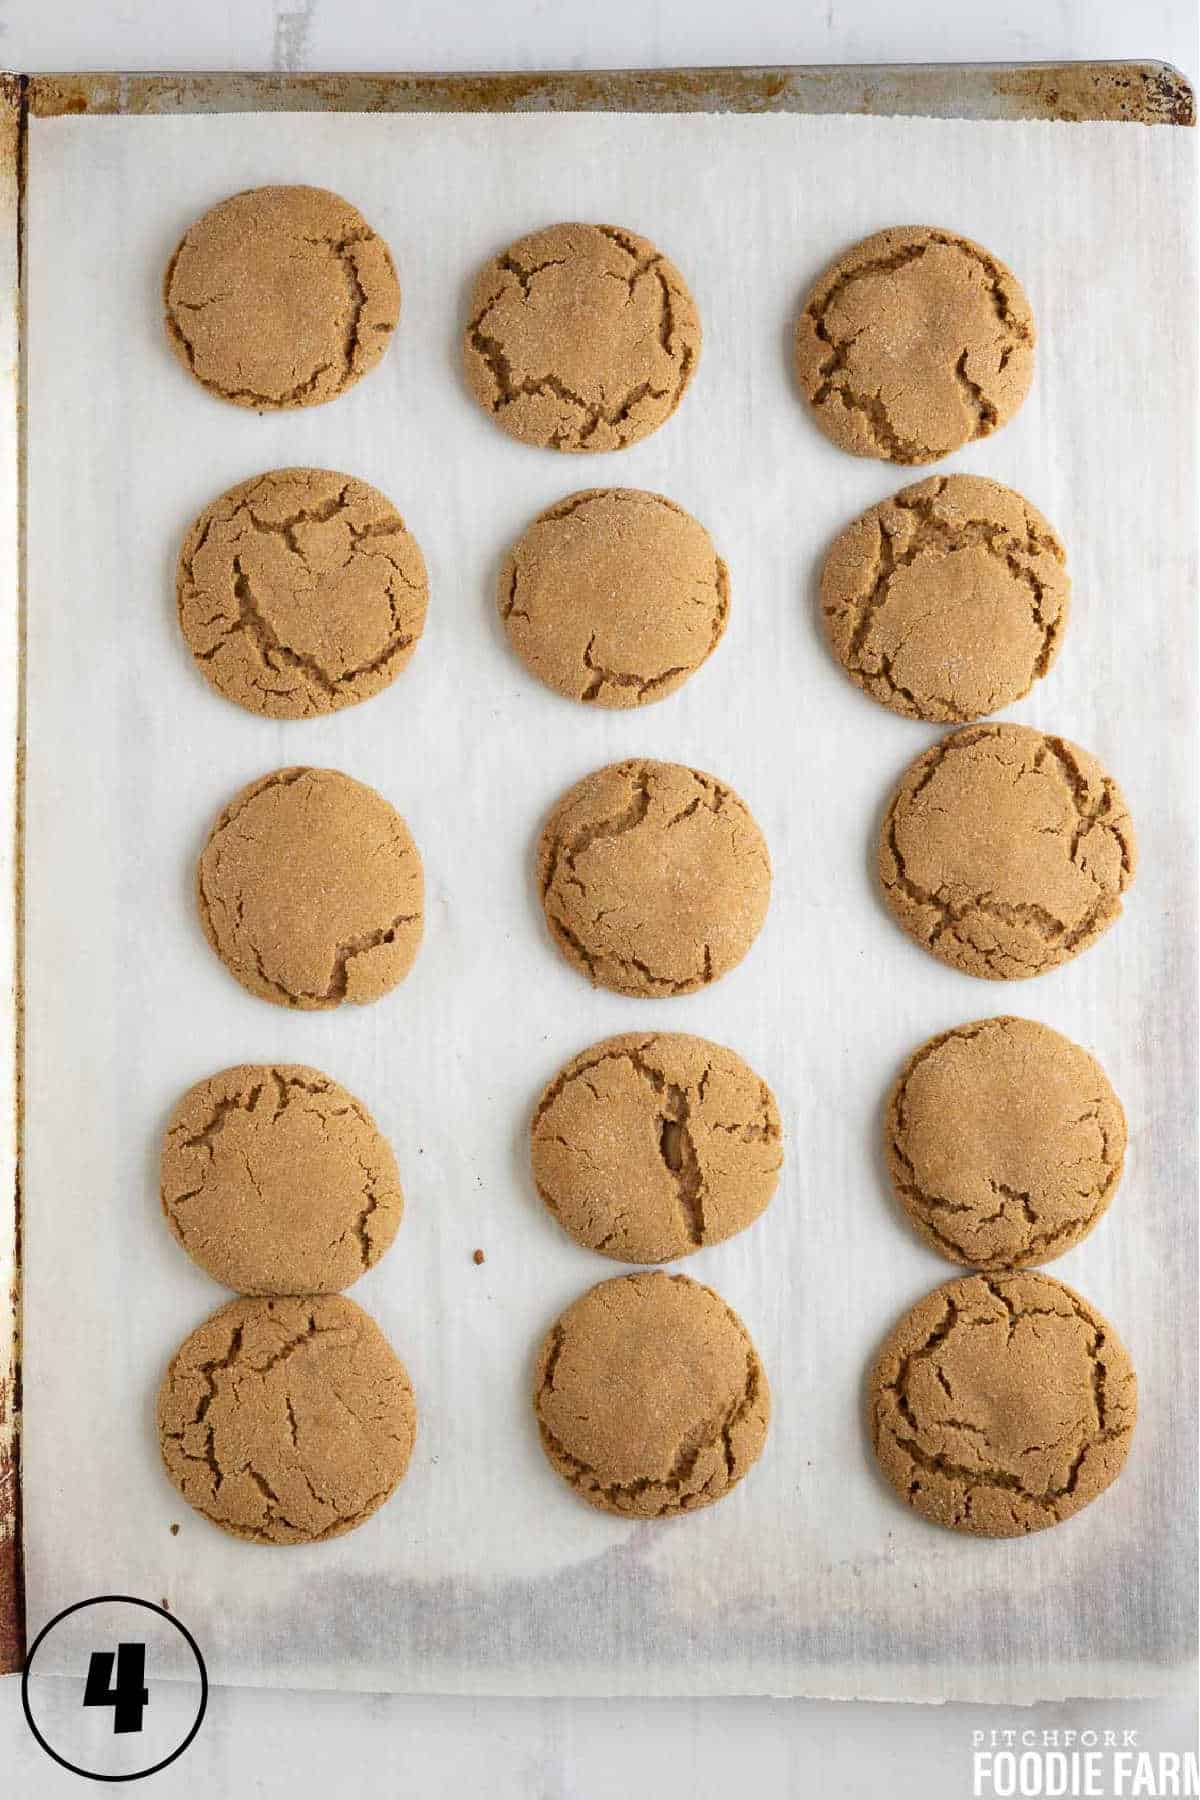 Baked ginger snap cookies on a baking sheet.